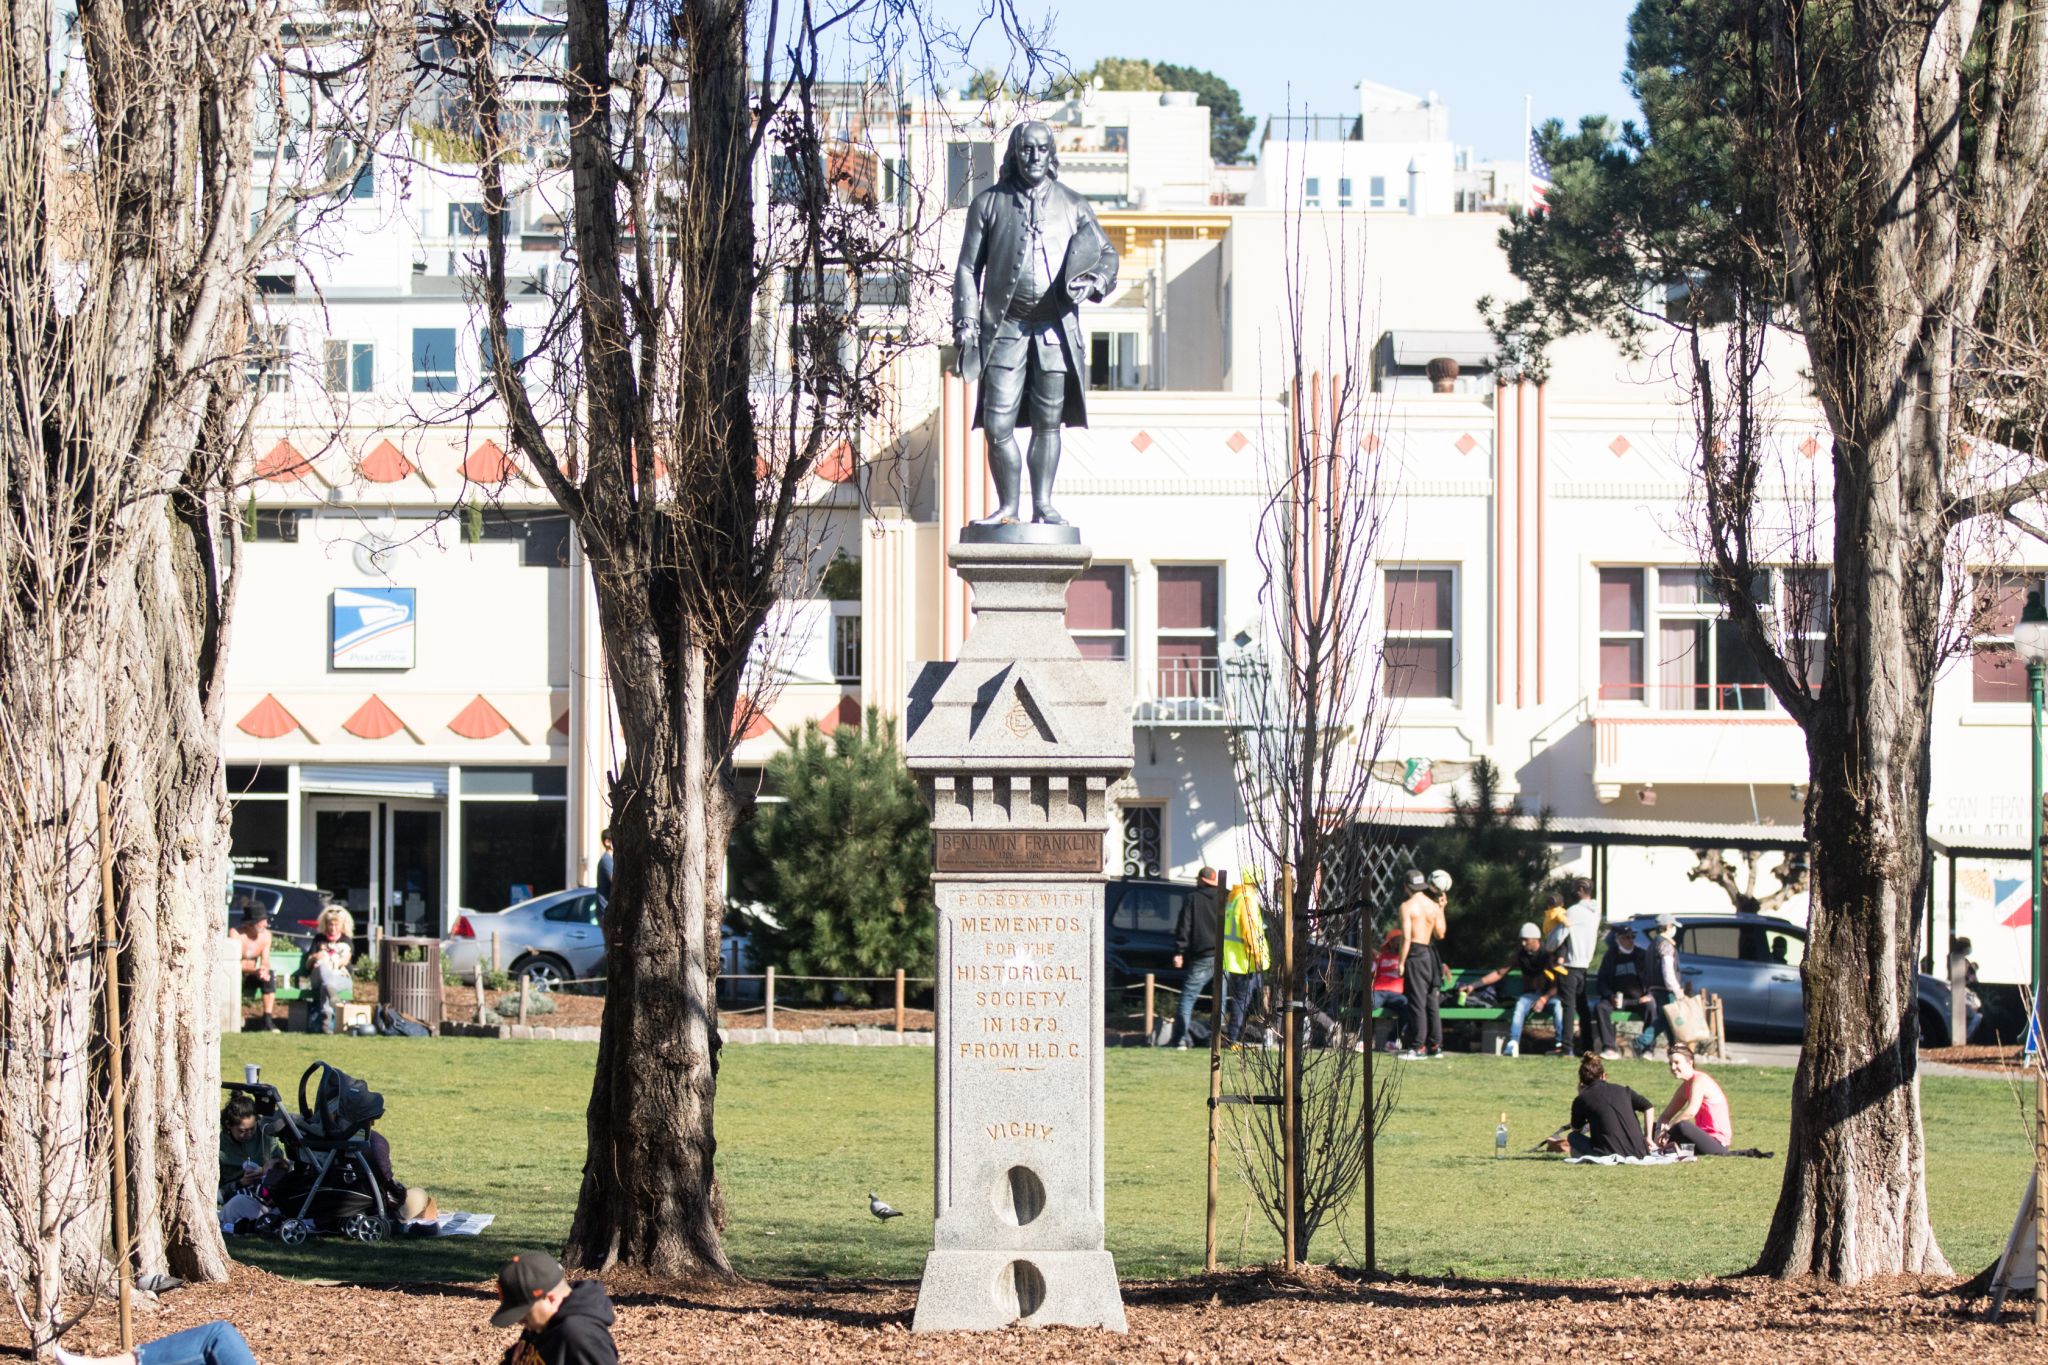 The story behind what's hidden beneath the Ben Franklin Statue in SF's Washington  Square Park